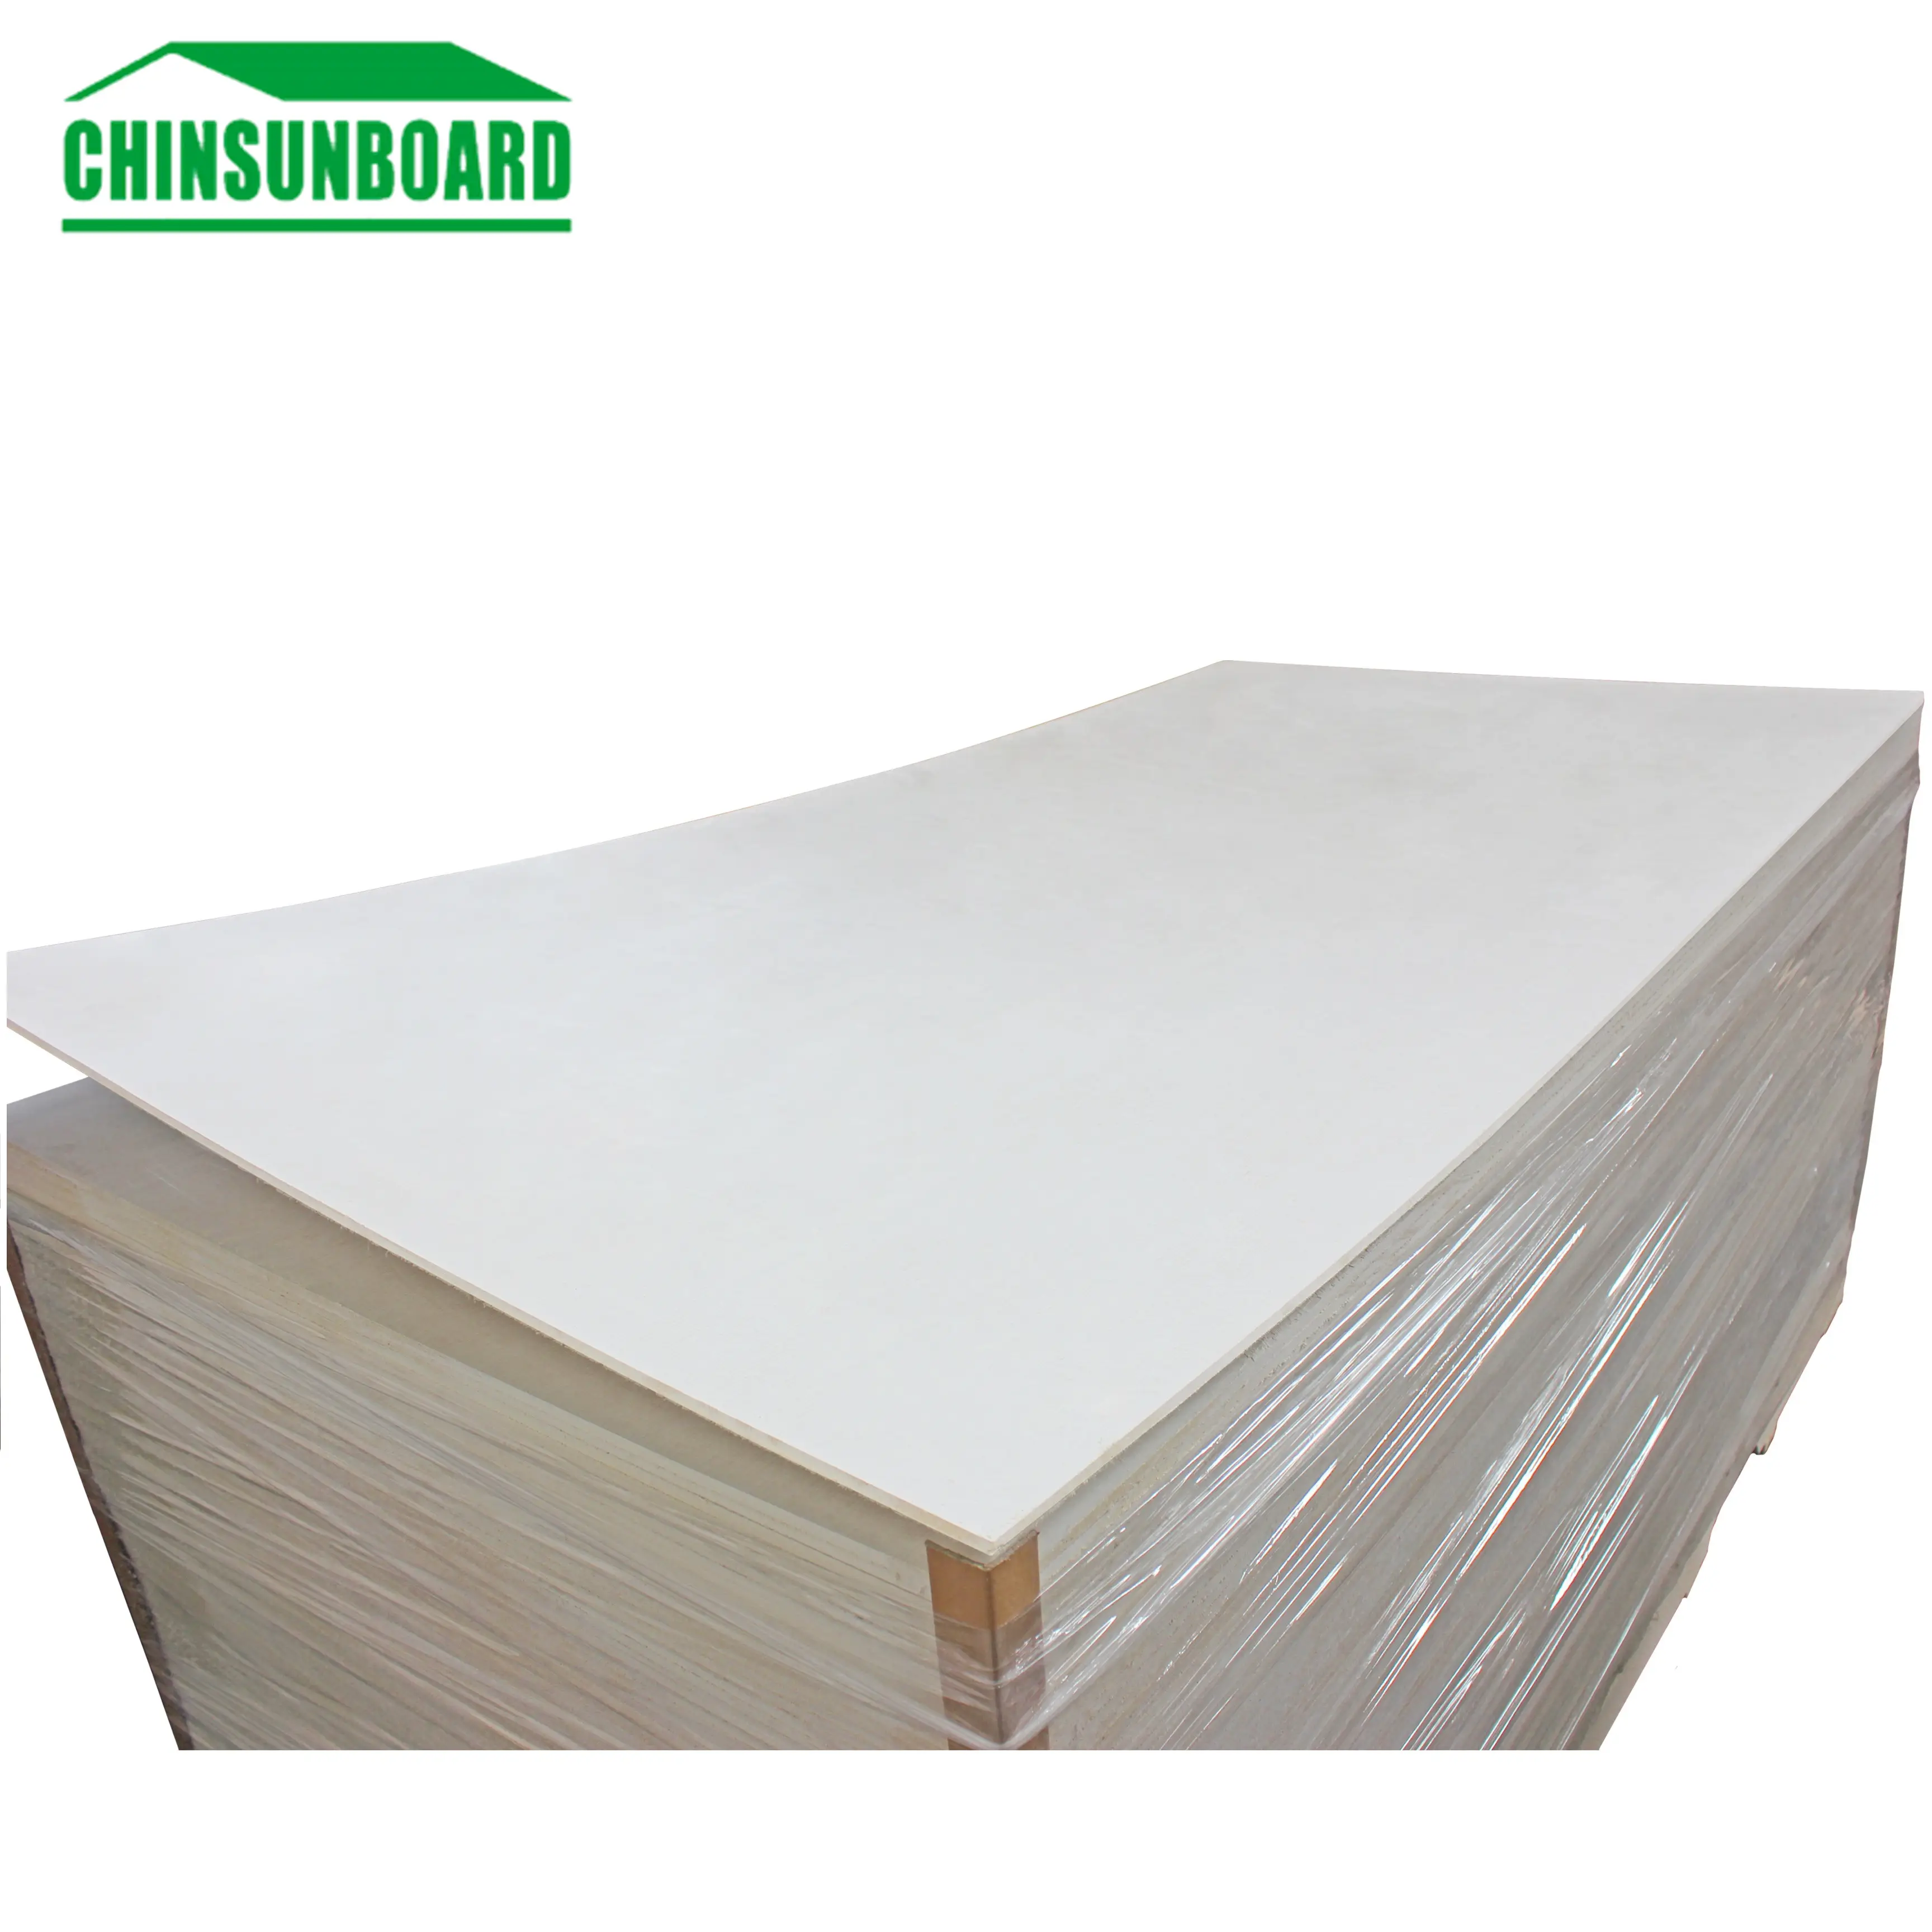 Top Quality Fire retardant Magnesium Oxide Roofing Sheets For Sandwich Panel or SIP Panel